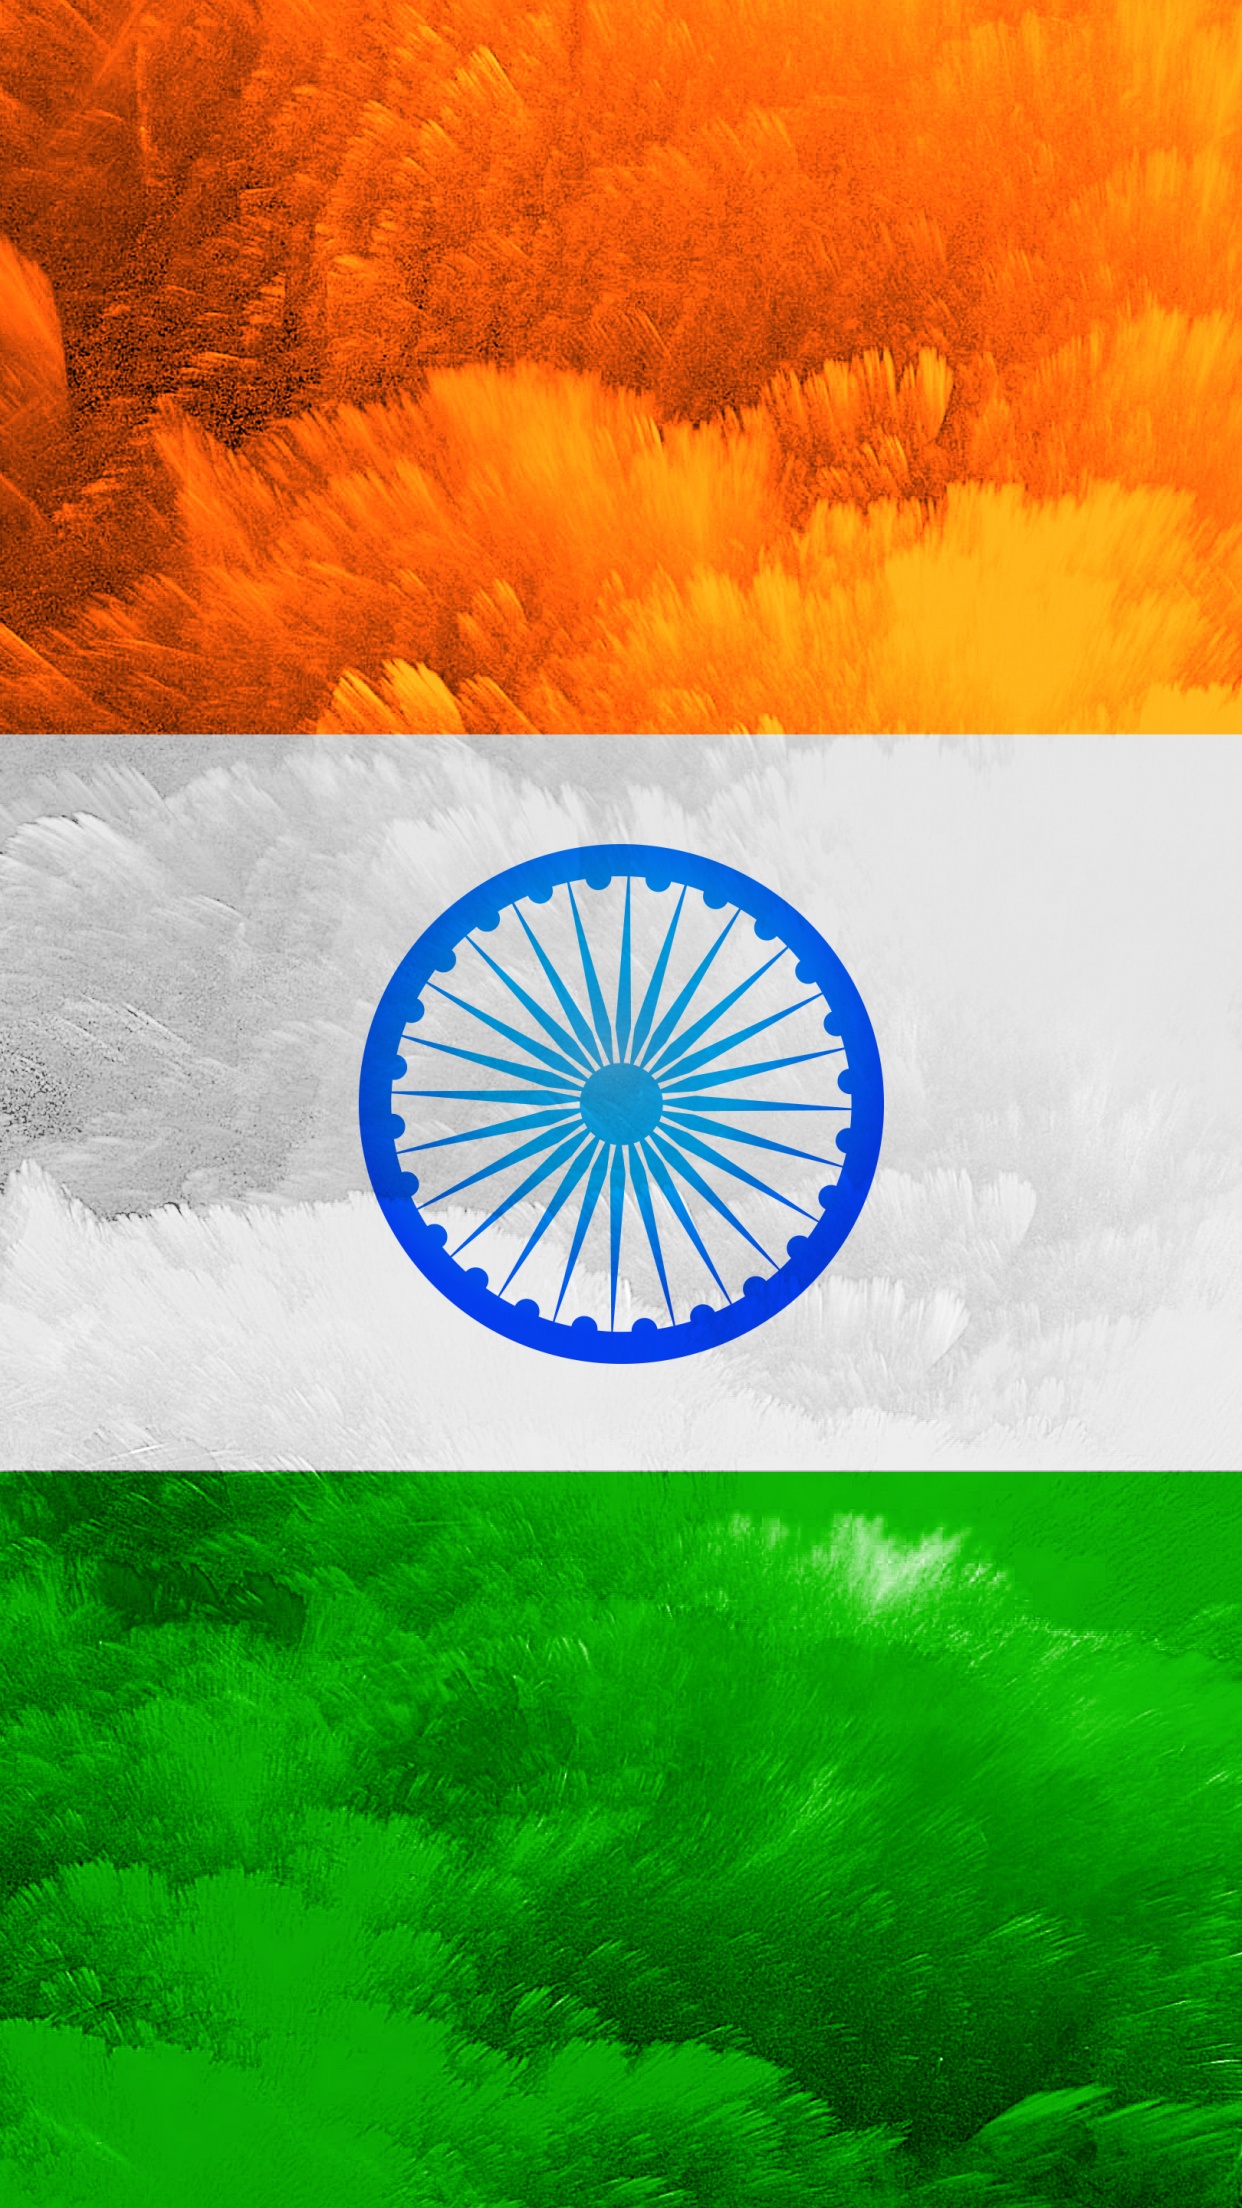 337 Indian Flag Wallpaper Backgrounds Stock Videos and RoyaltyFree Footage   iStock